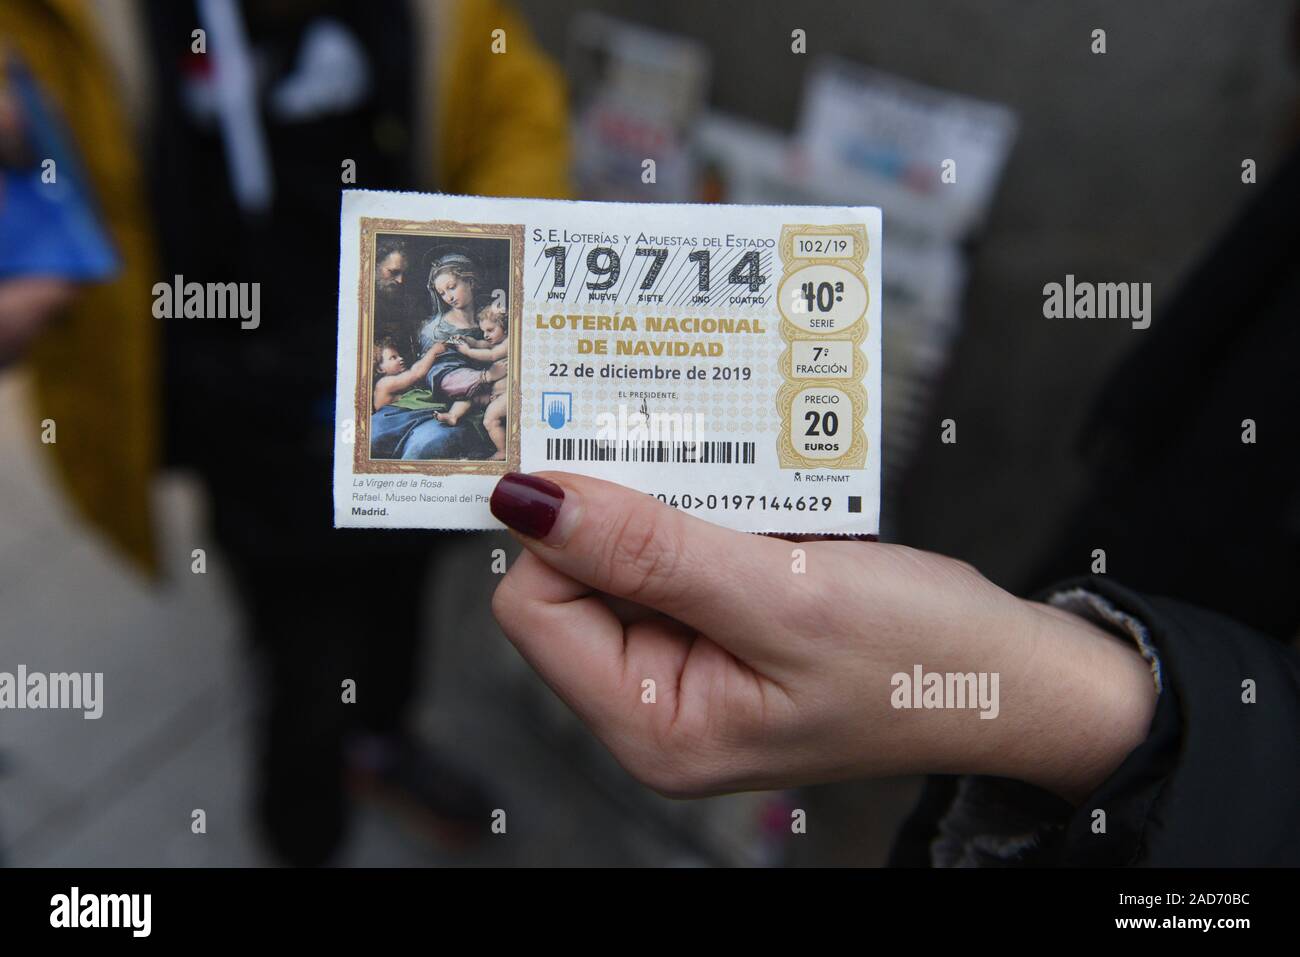 A spanish Christmas El Gordo lottery ticket seen in Madrid.The famous draw 'El Gordo' would be celebrated on December 22, 2019. More than 2.3 billion euros ($3 billion) in prizes would be distributed. Stock Photo